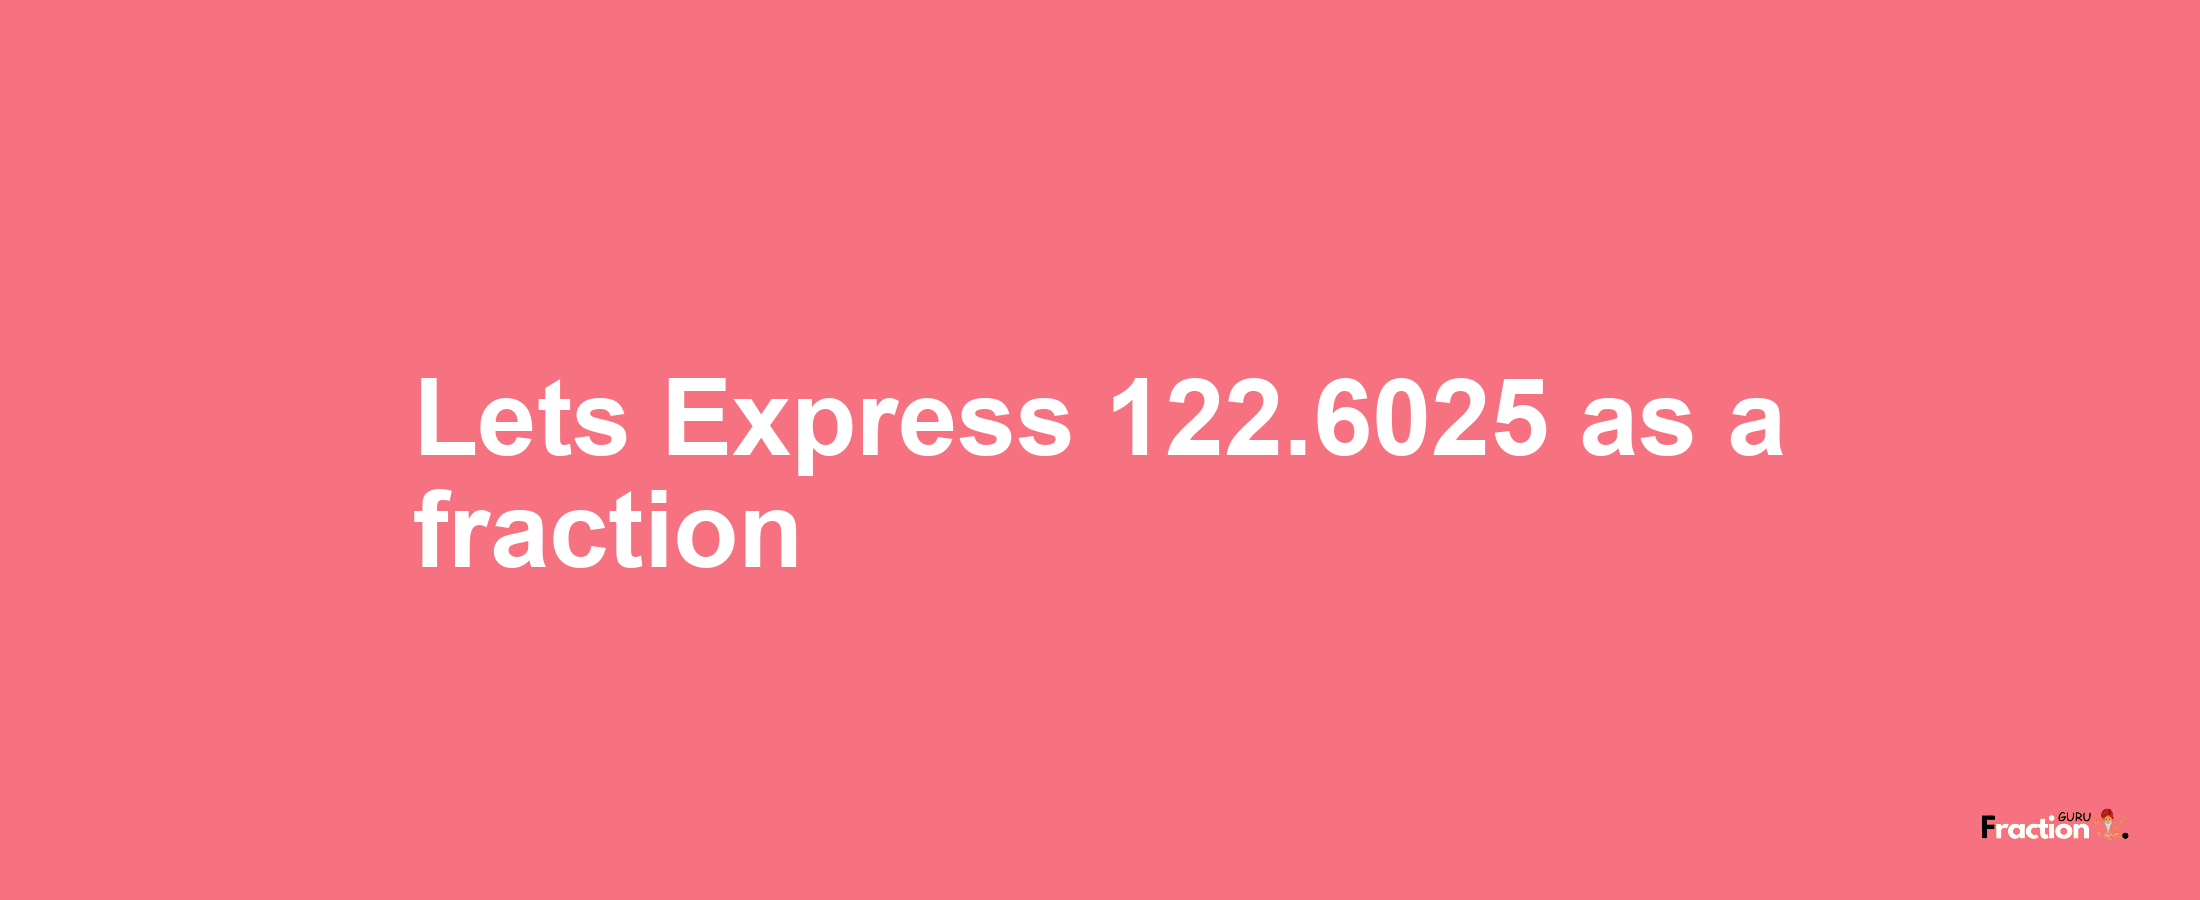 Lets Express 122.6025 as afraction